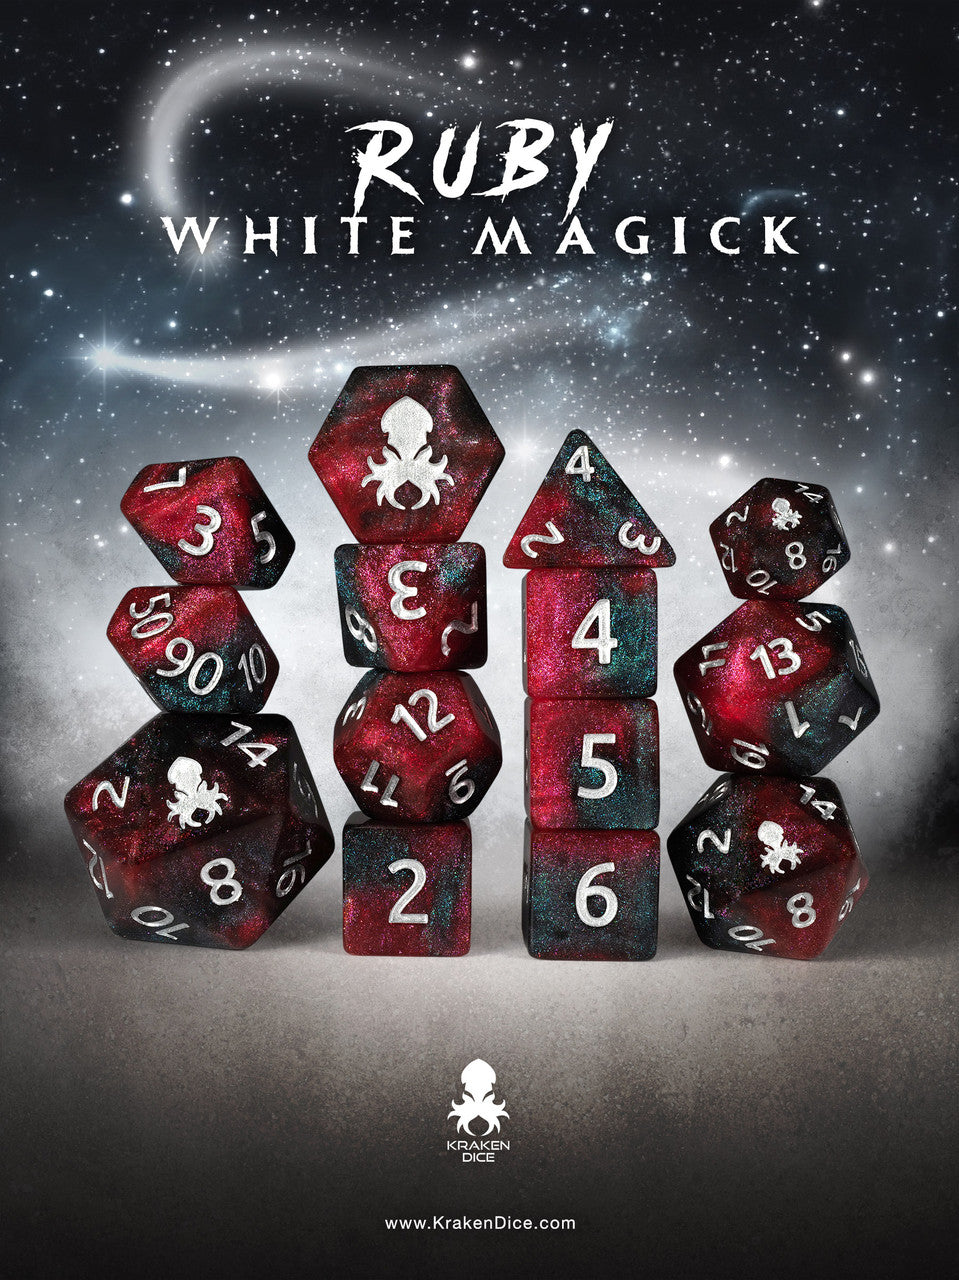 Ruby White Magick 14pc Dice Set inked in Silver